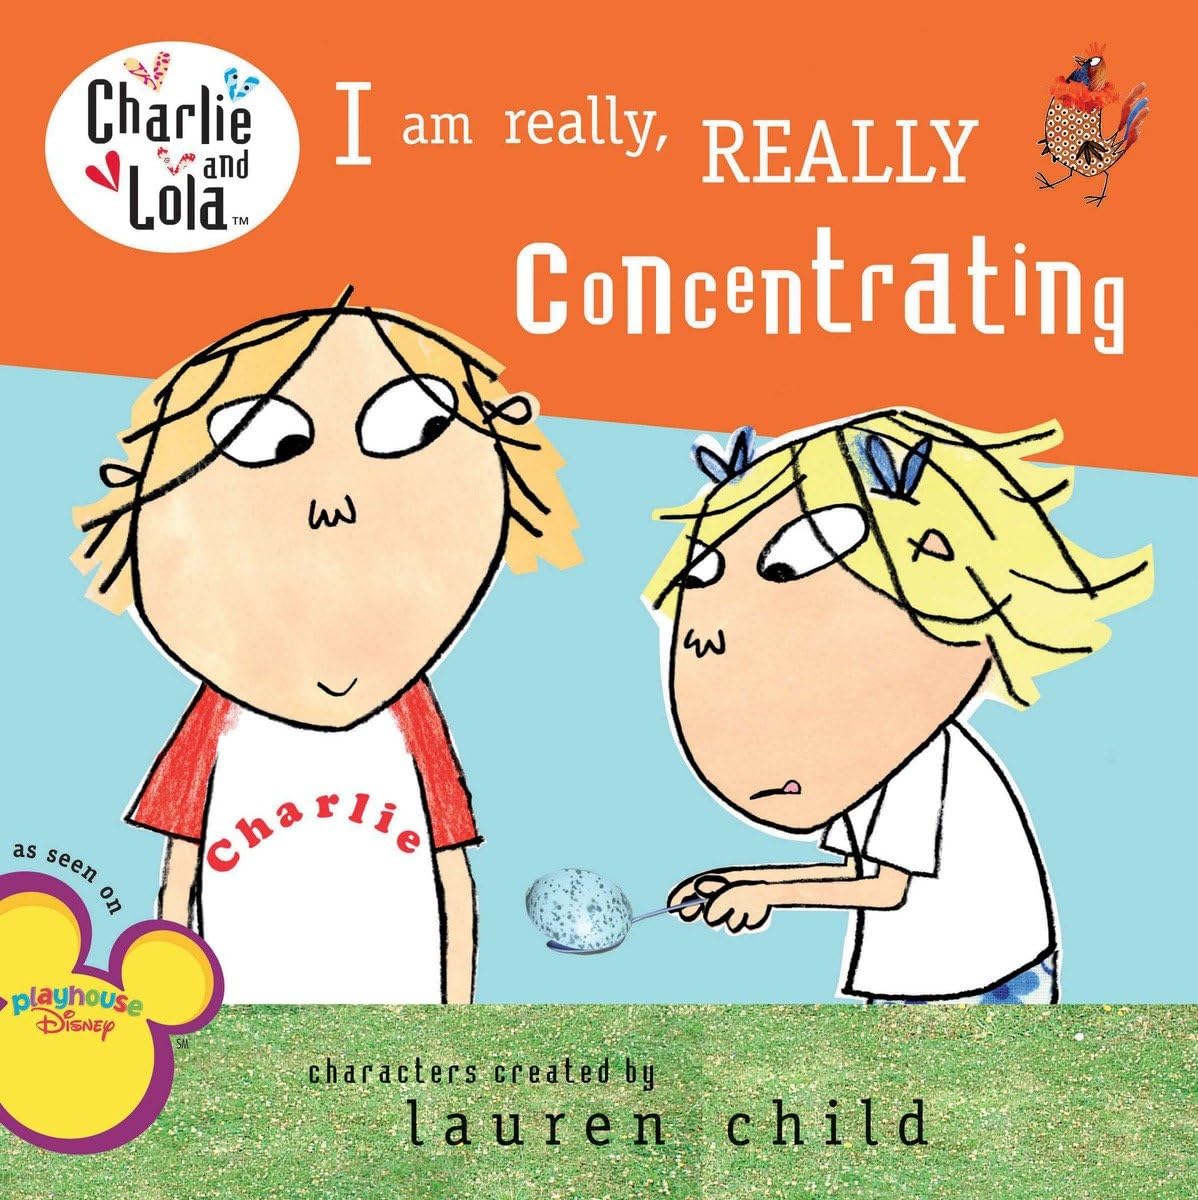 Lauren Child: I Am Really, Really Concentrating (2008, Grosset and Dunlap)